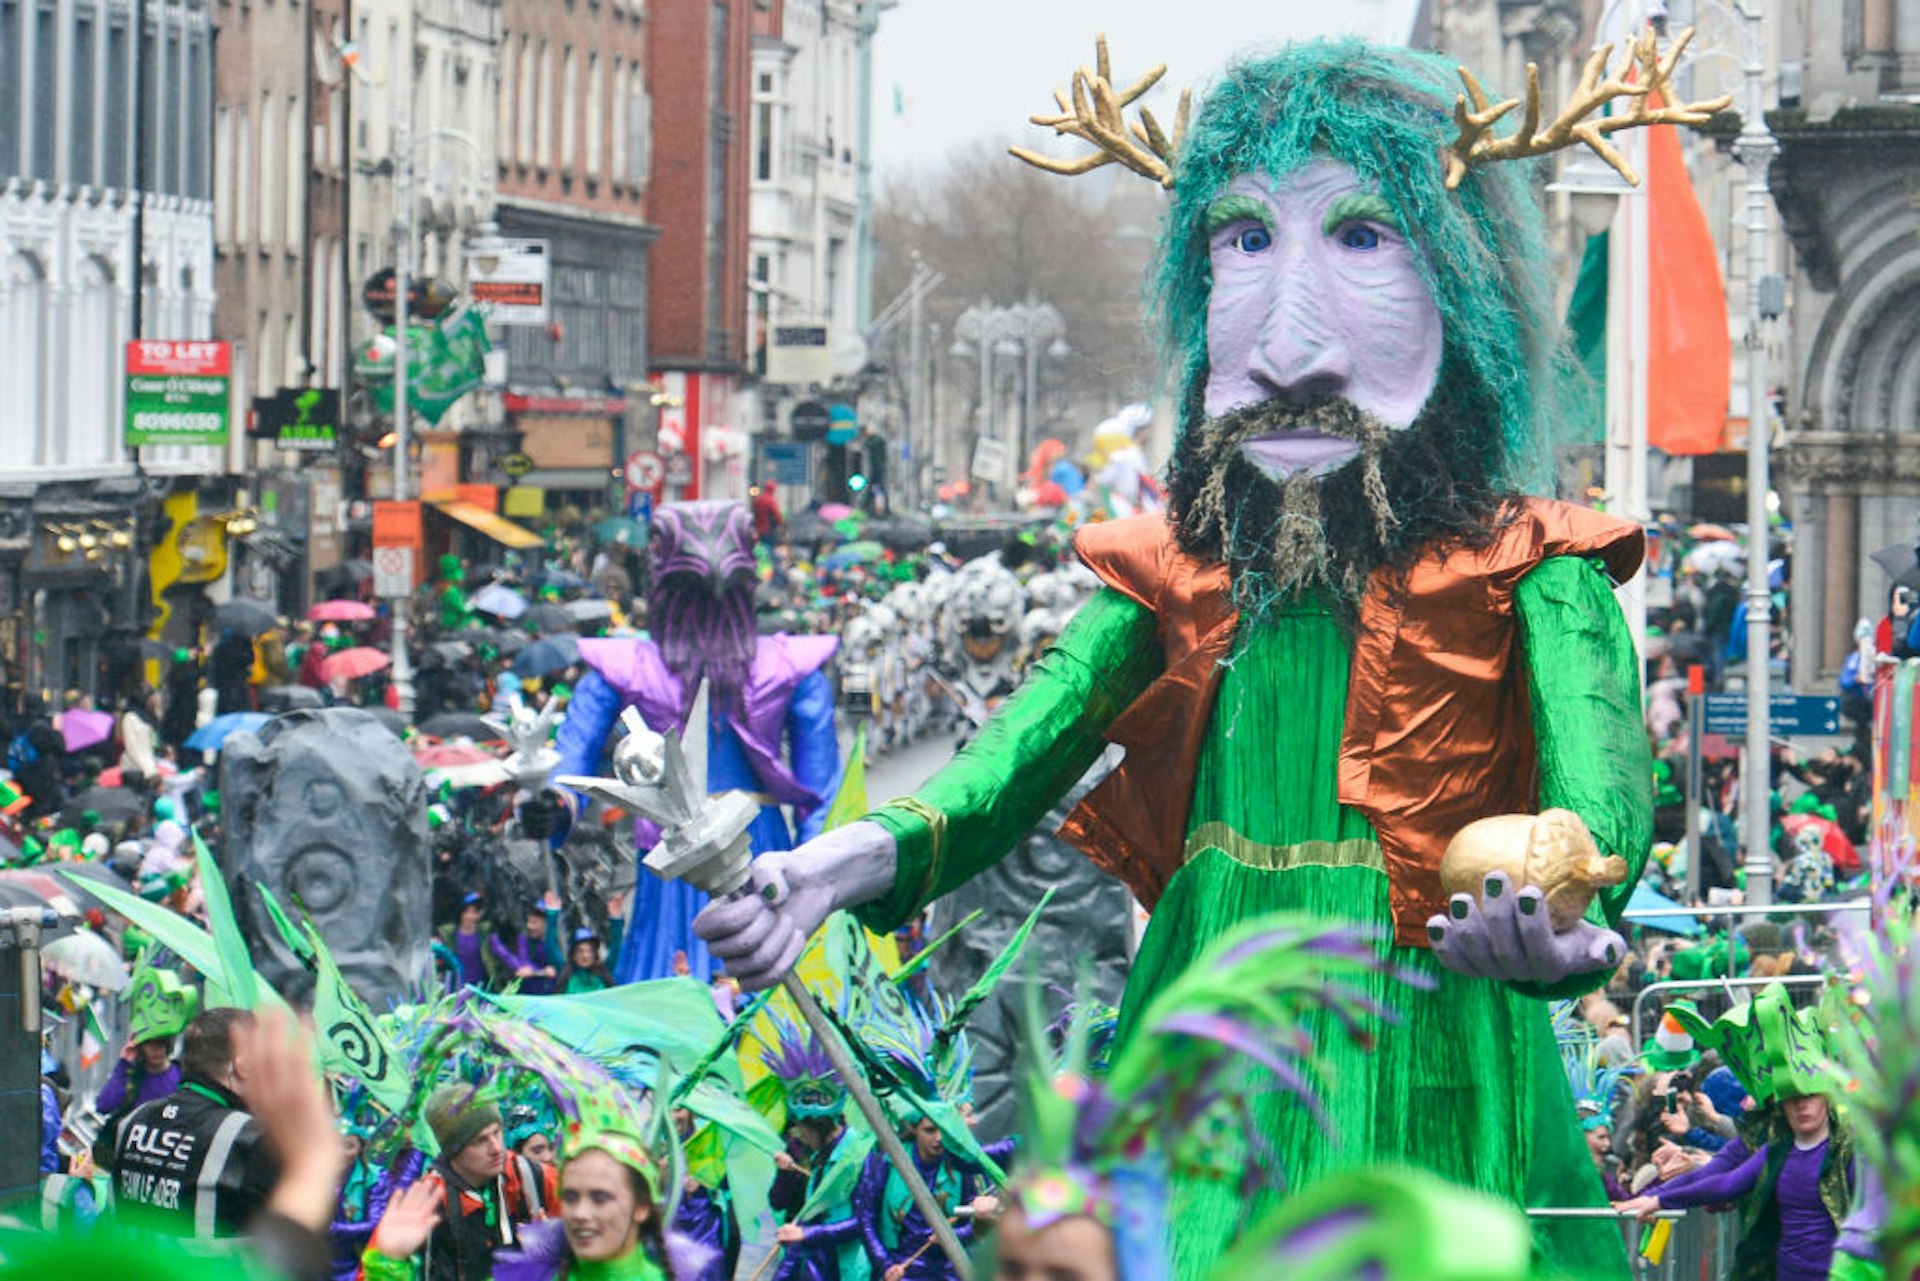 A shot of the colourful parade in Dublin with a huge paper mache model of a man with purple skin, green hair and golden horns holding a golden acorn.